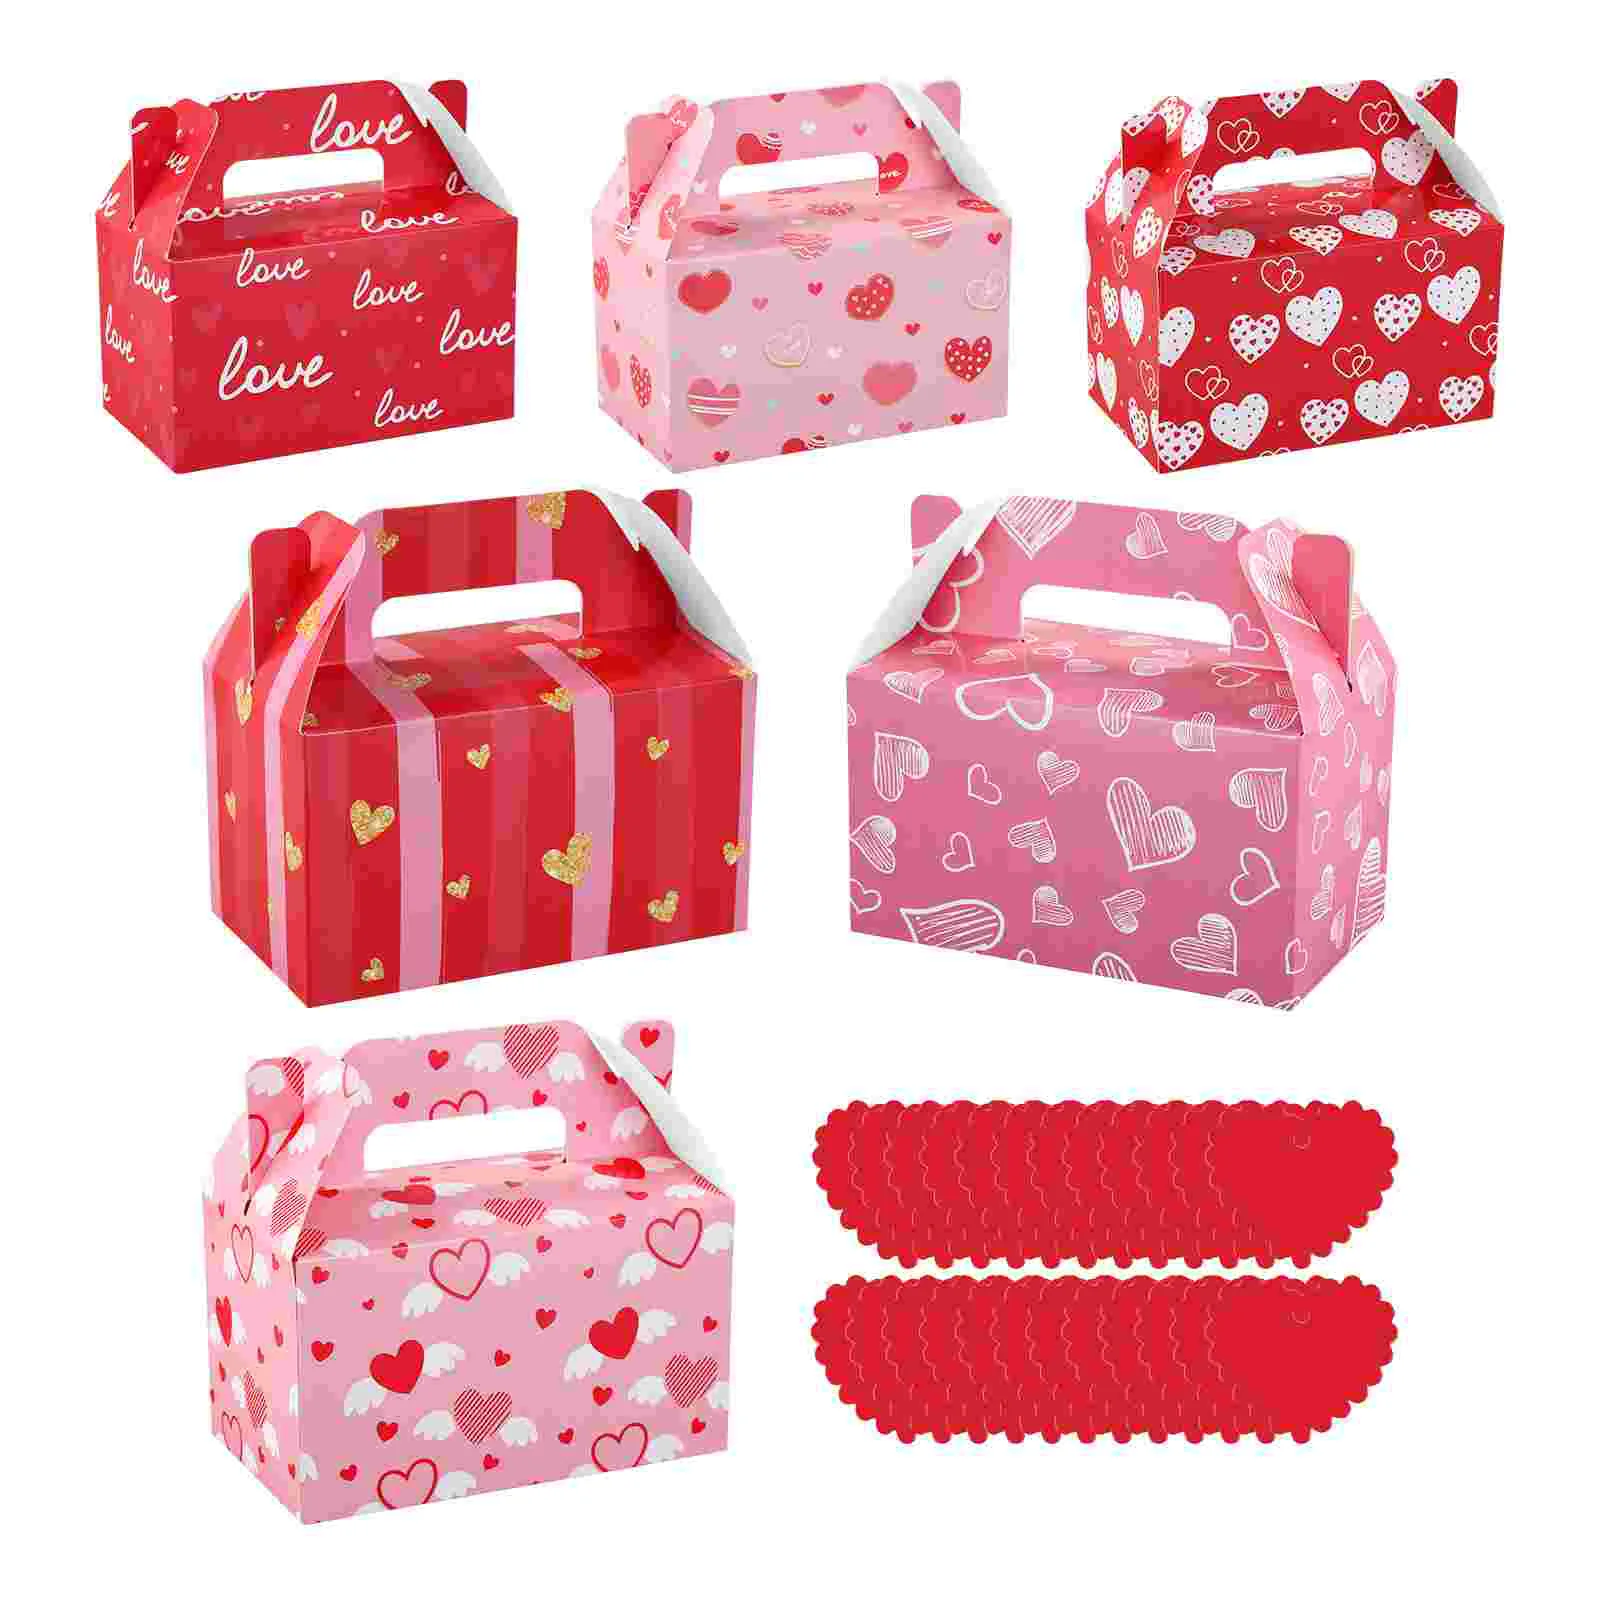 

Valentines Day Treat Boxes 24pcs, Cardboard Hearts Bag Wedding Party Treat Boxes Boxes Cookie Holders Candy Boxes Includes 24